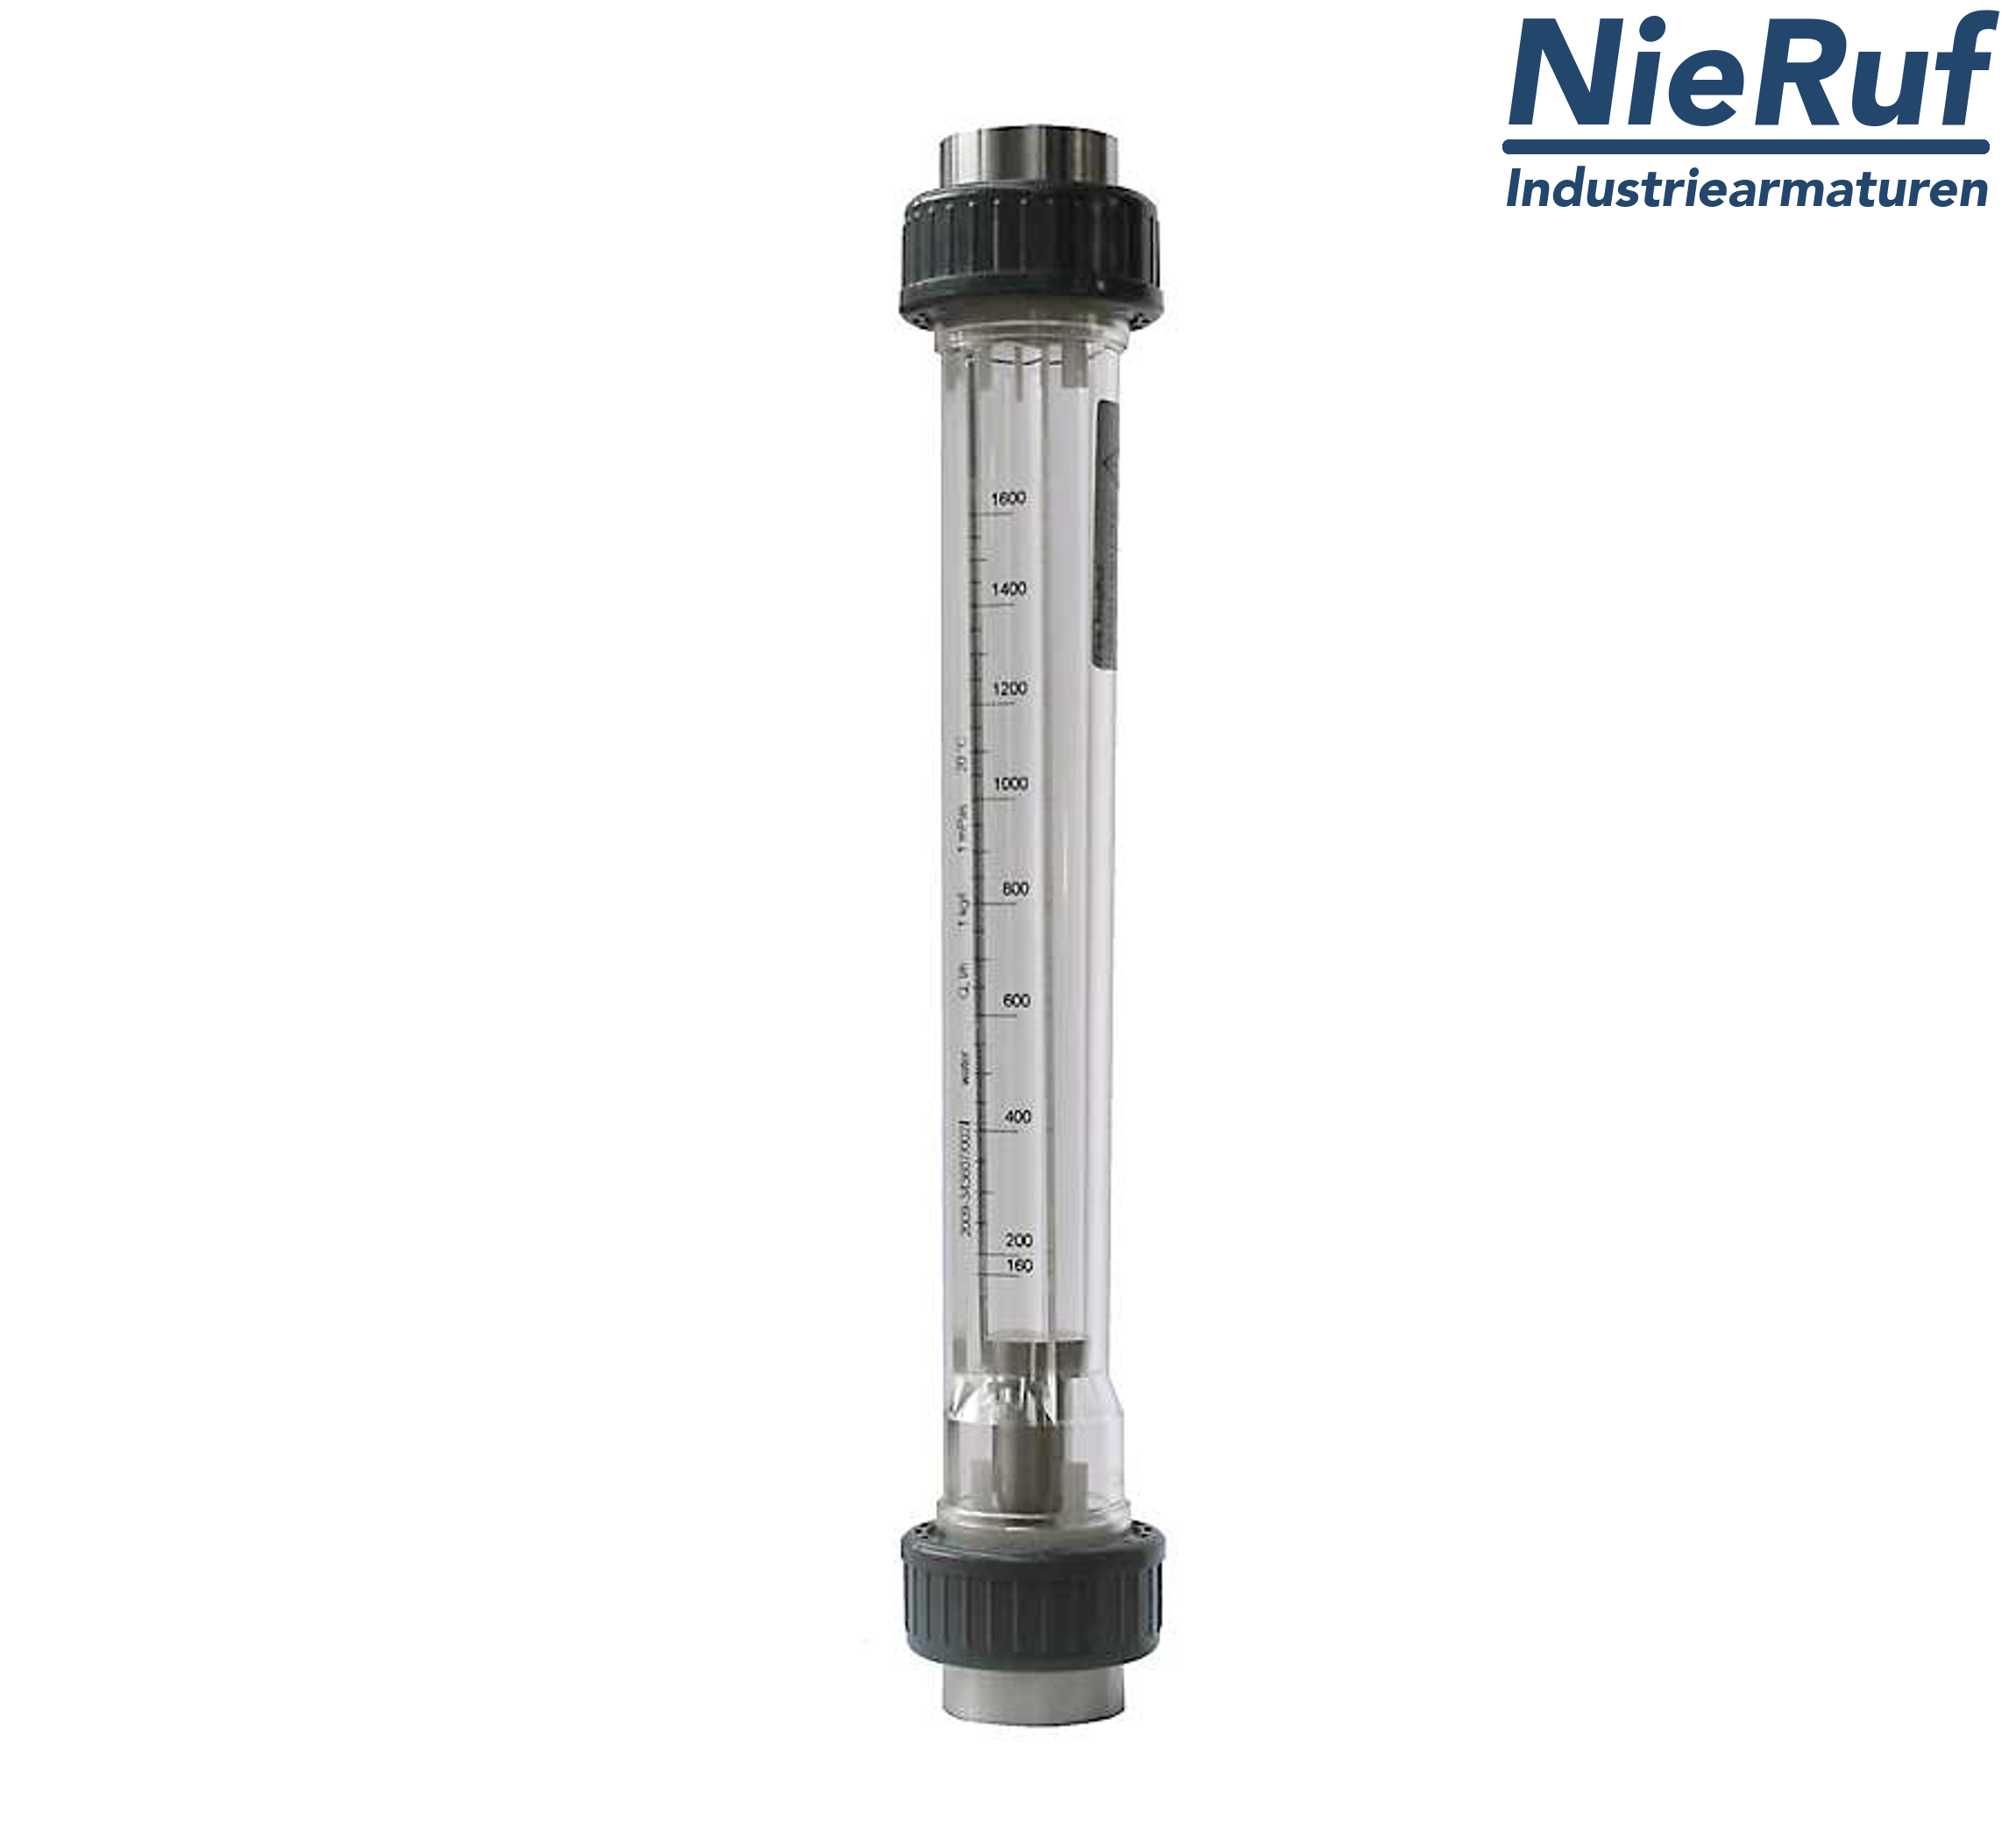 Variable area flowmeter 1 1/4" inch 6700.0 - 20000 l/h water NBR